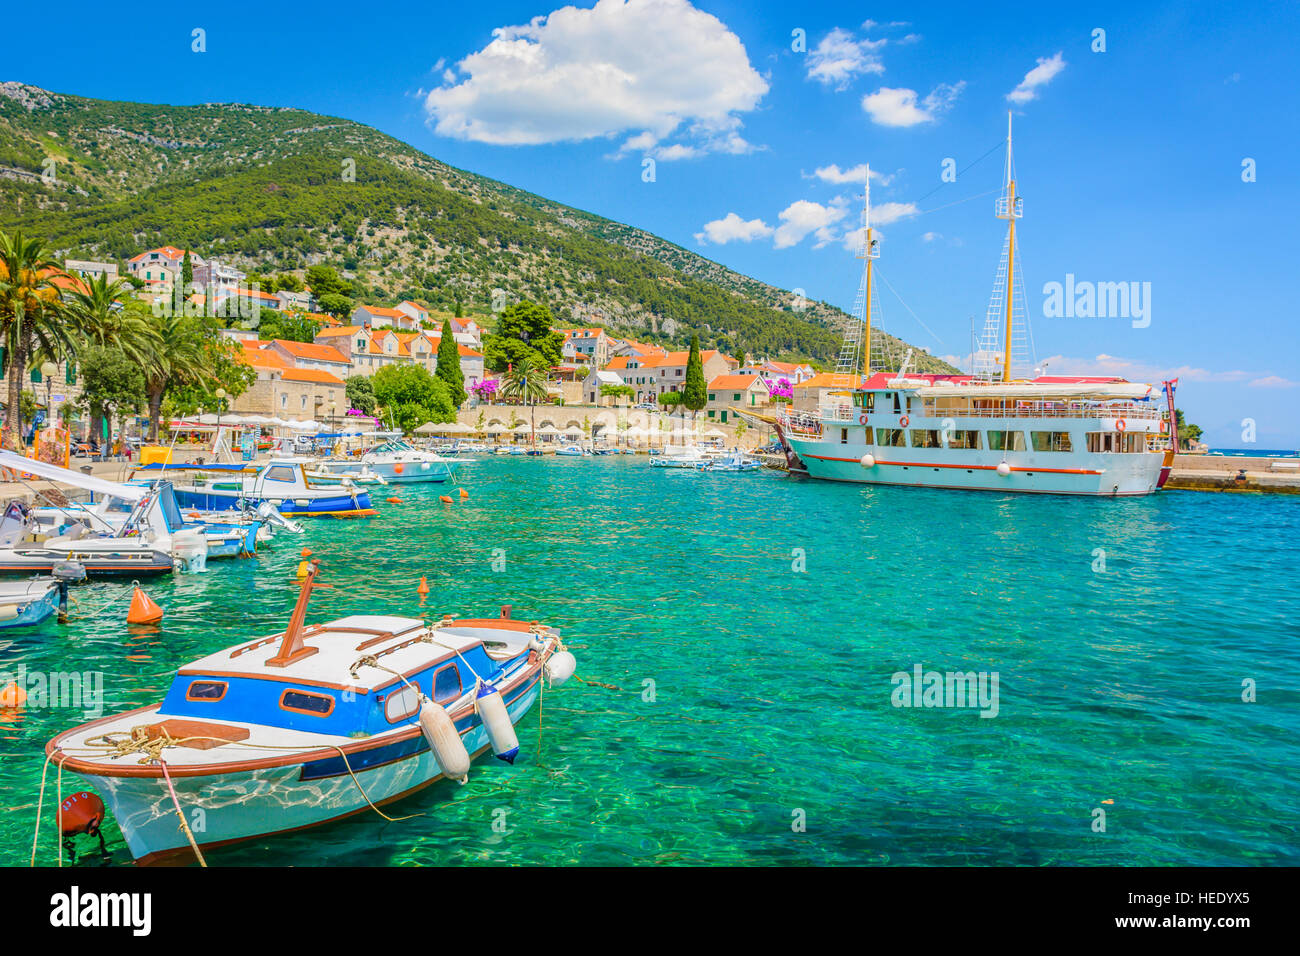 Colorful view at touristic summer destination town Bol on Island Brac, Croatia Europe travel places. Stock Photo